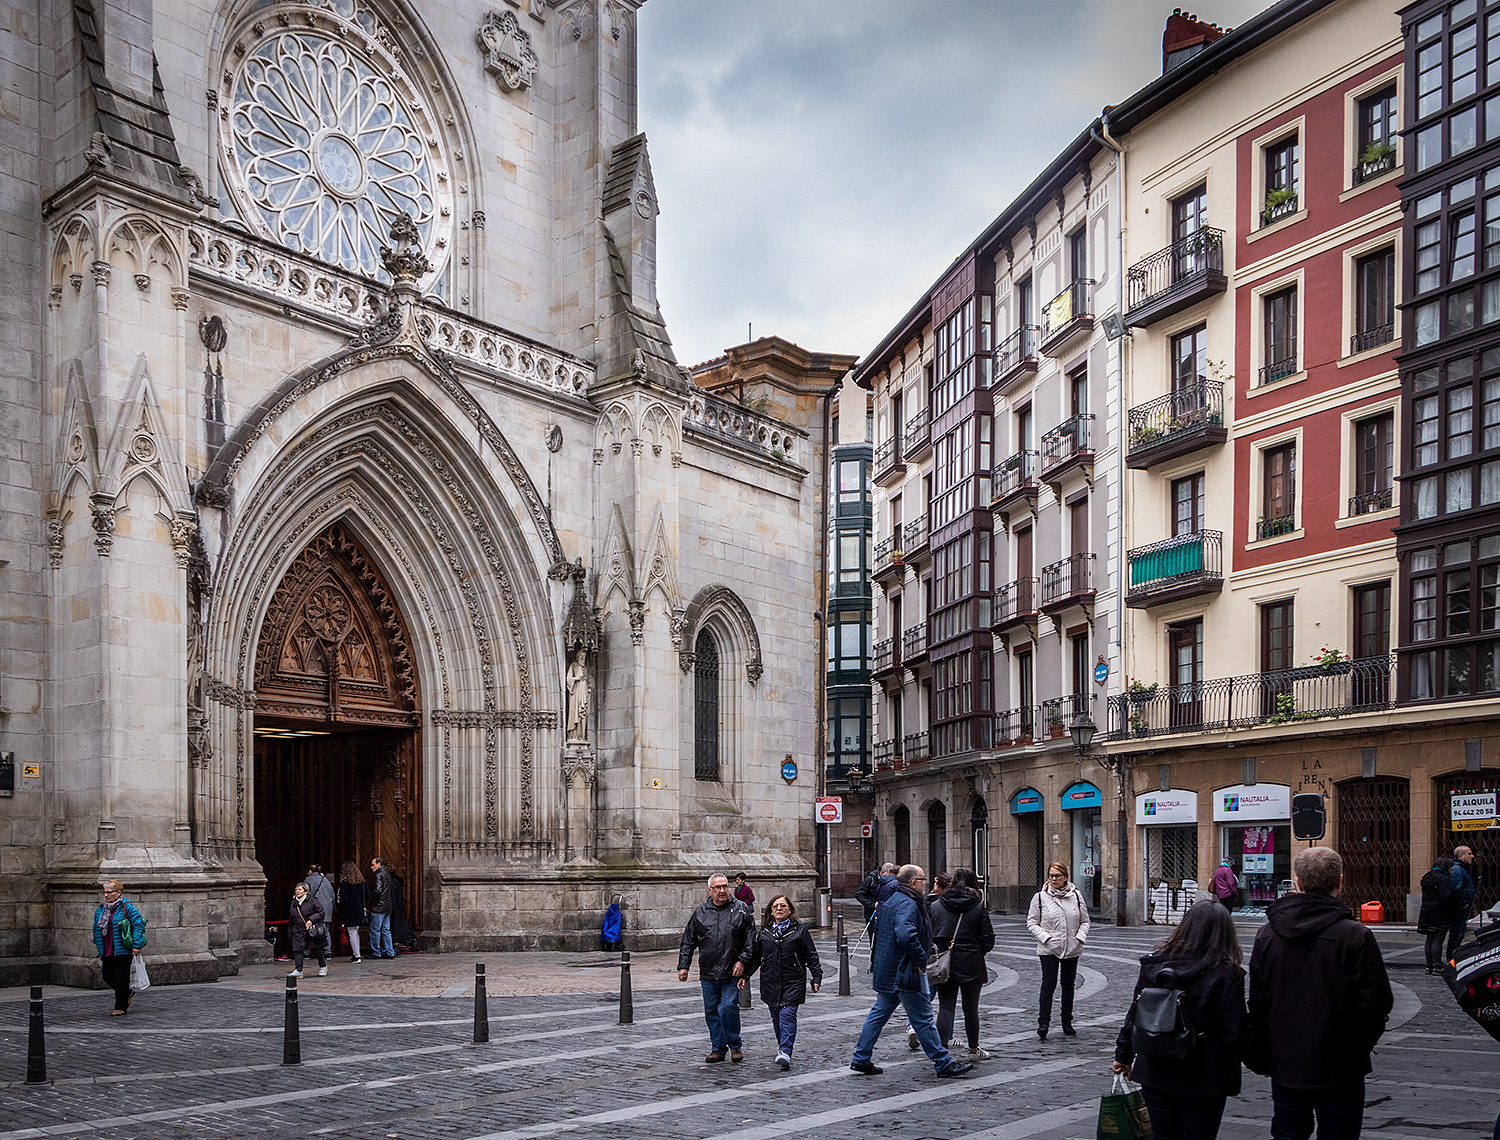 Visit the cathedral, located in Bilbao's old town.